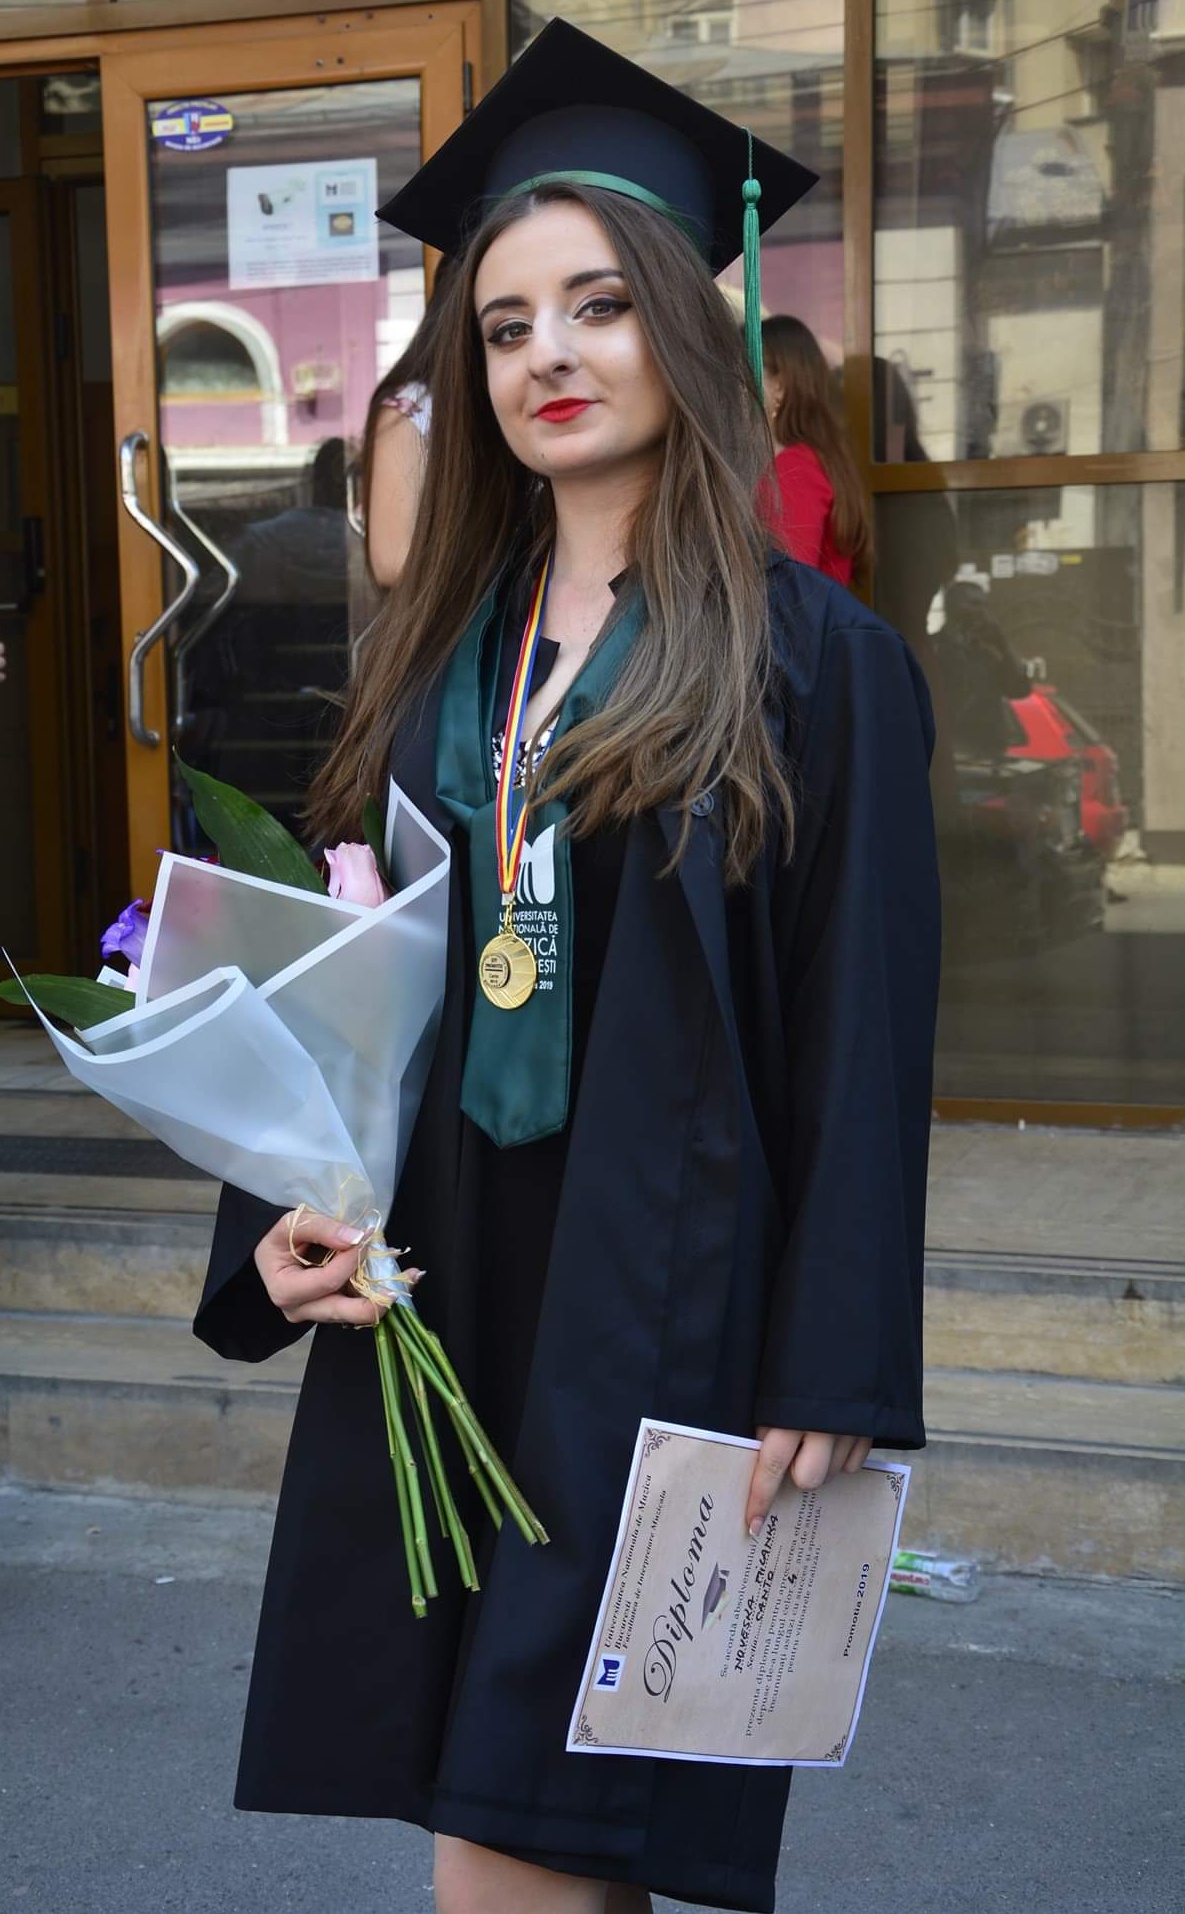 Milanka Noveska's Bachelor graduation. She received Medal of Honor by the university as Top student of the generation